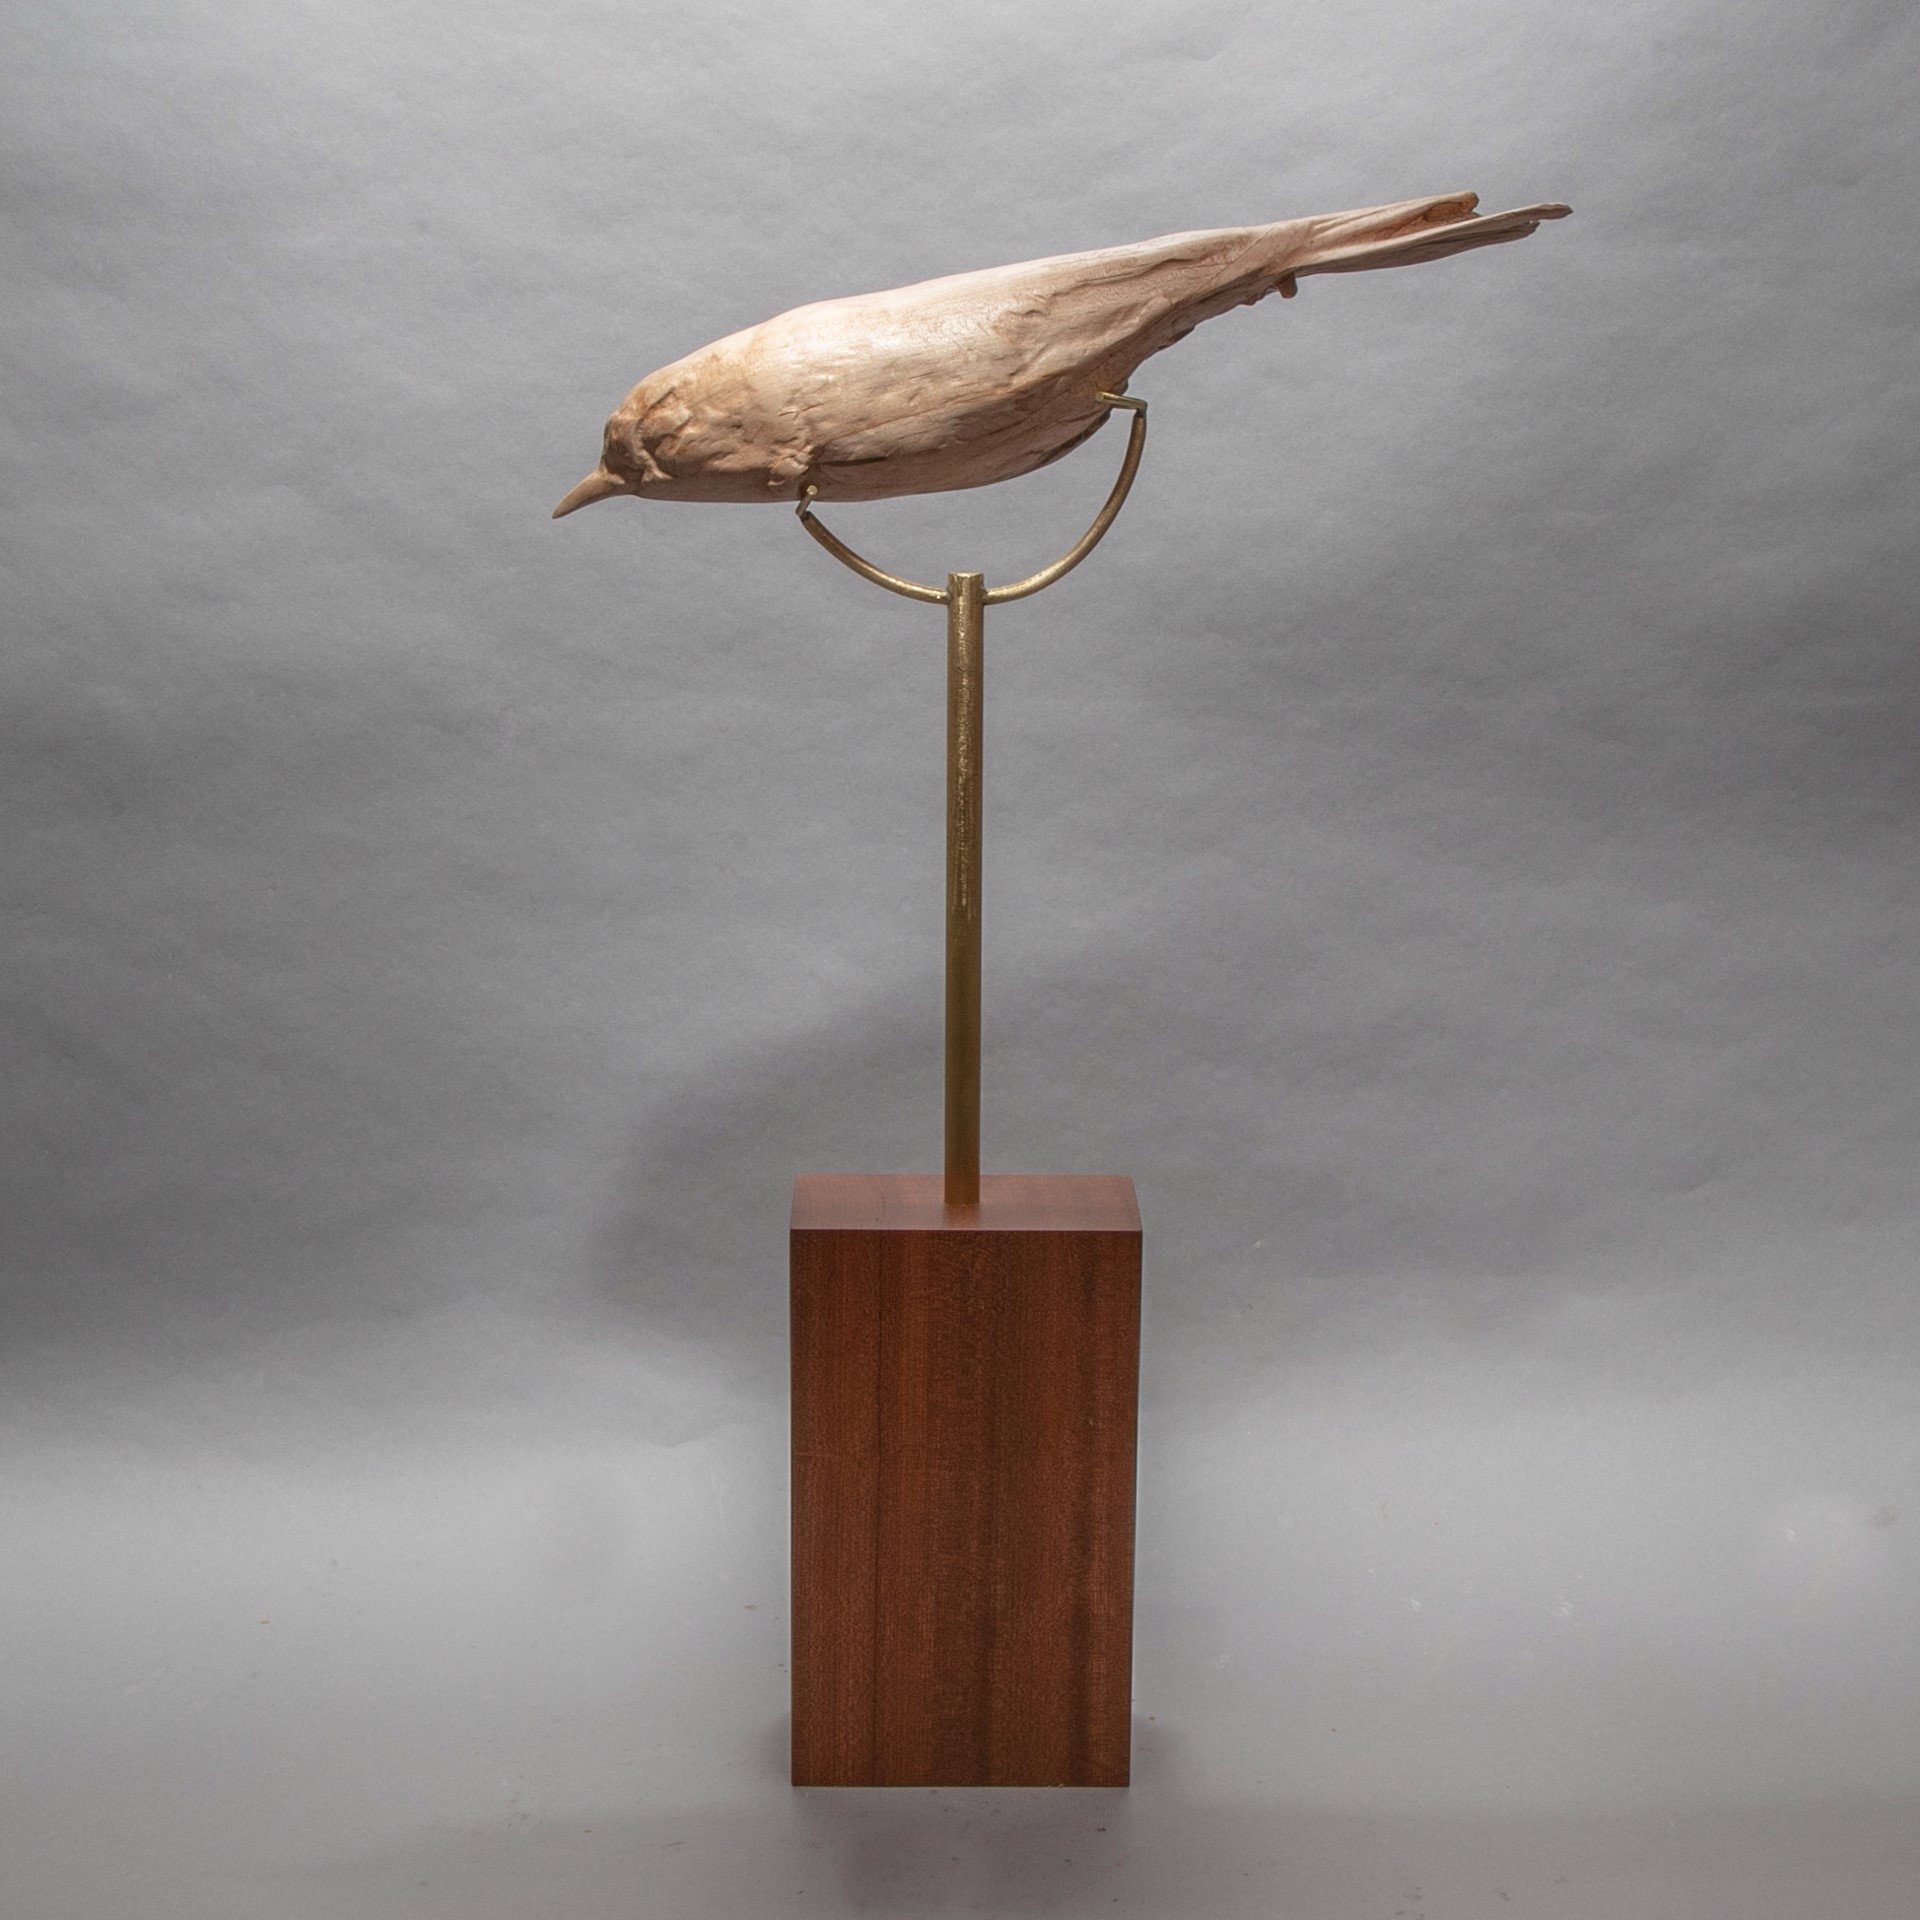 Specimen #13 - Scarlet flycatcher in maple with brass and sipo base by Dana Younger